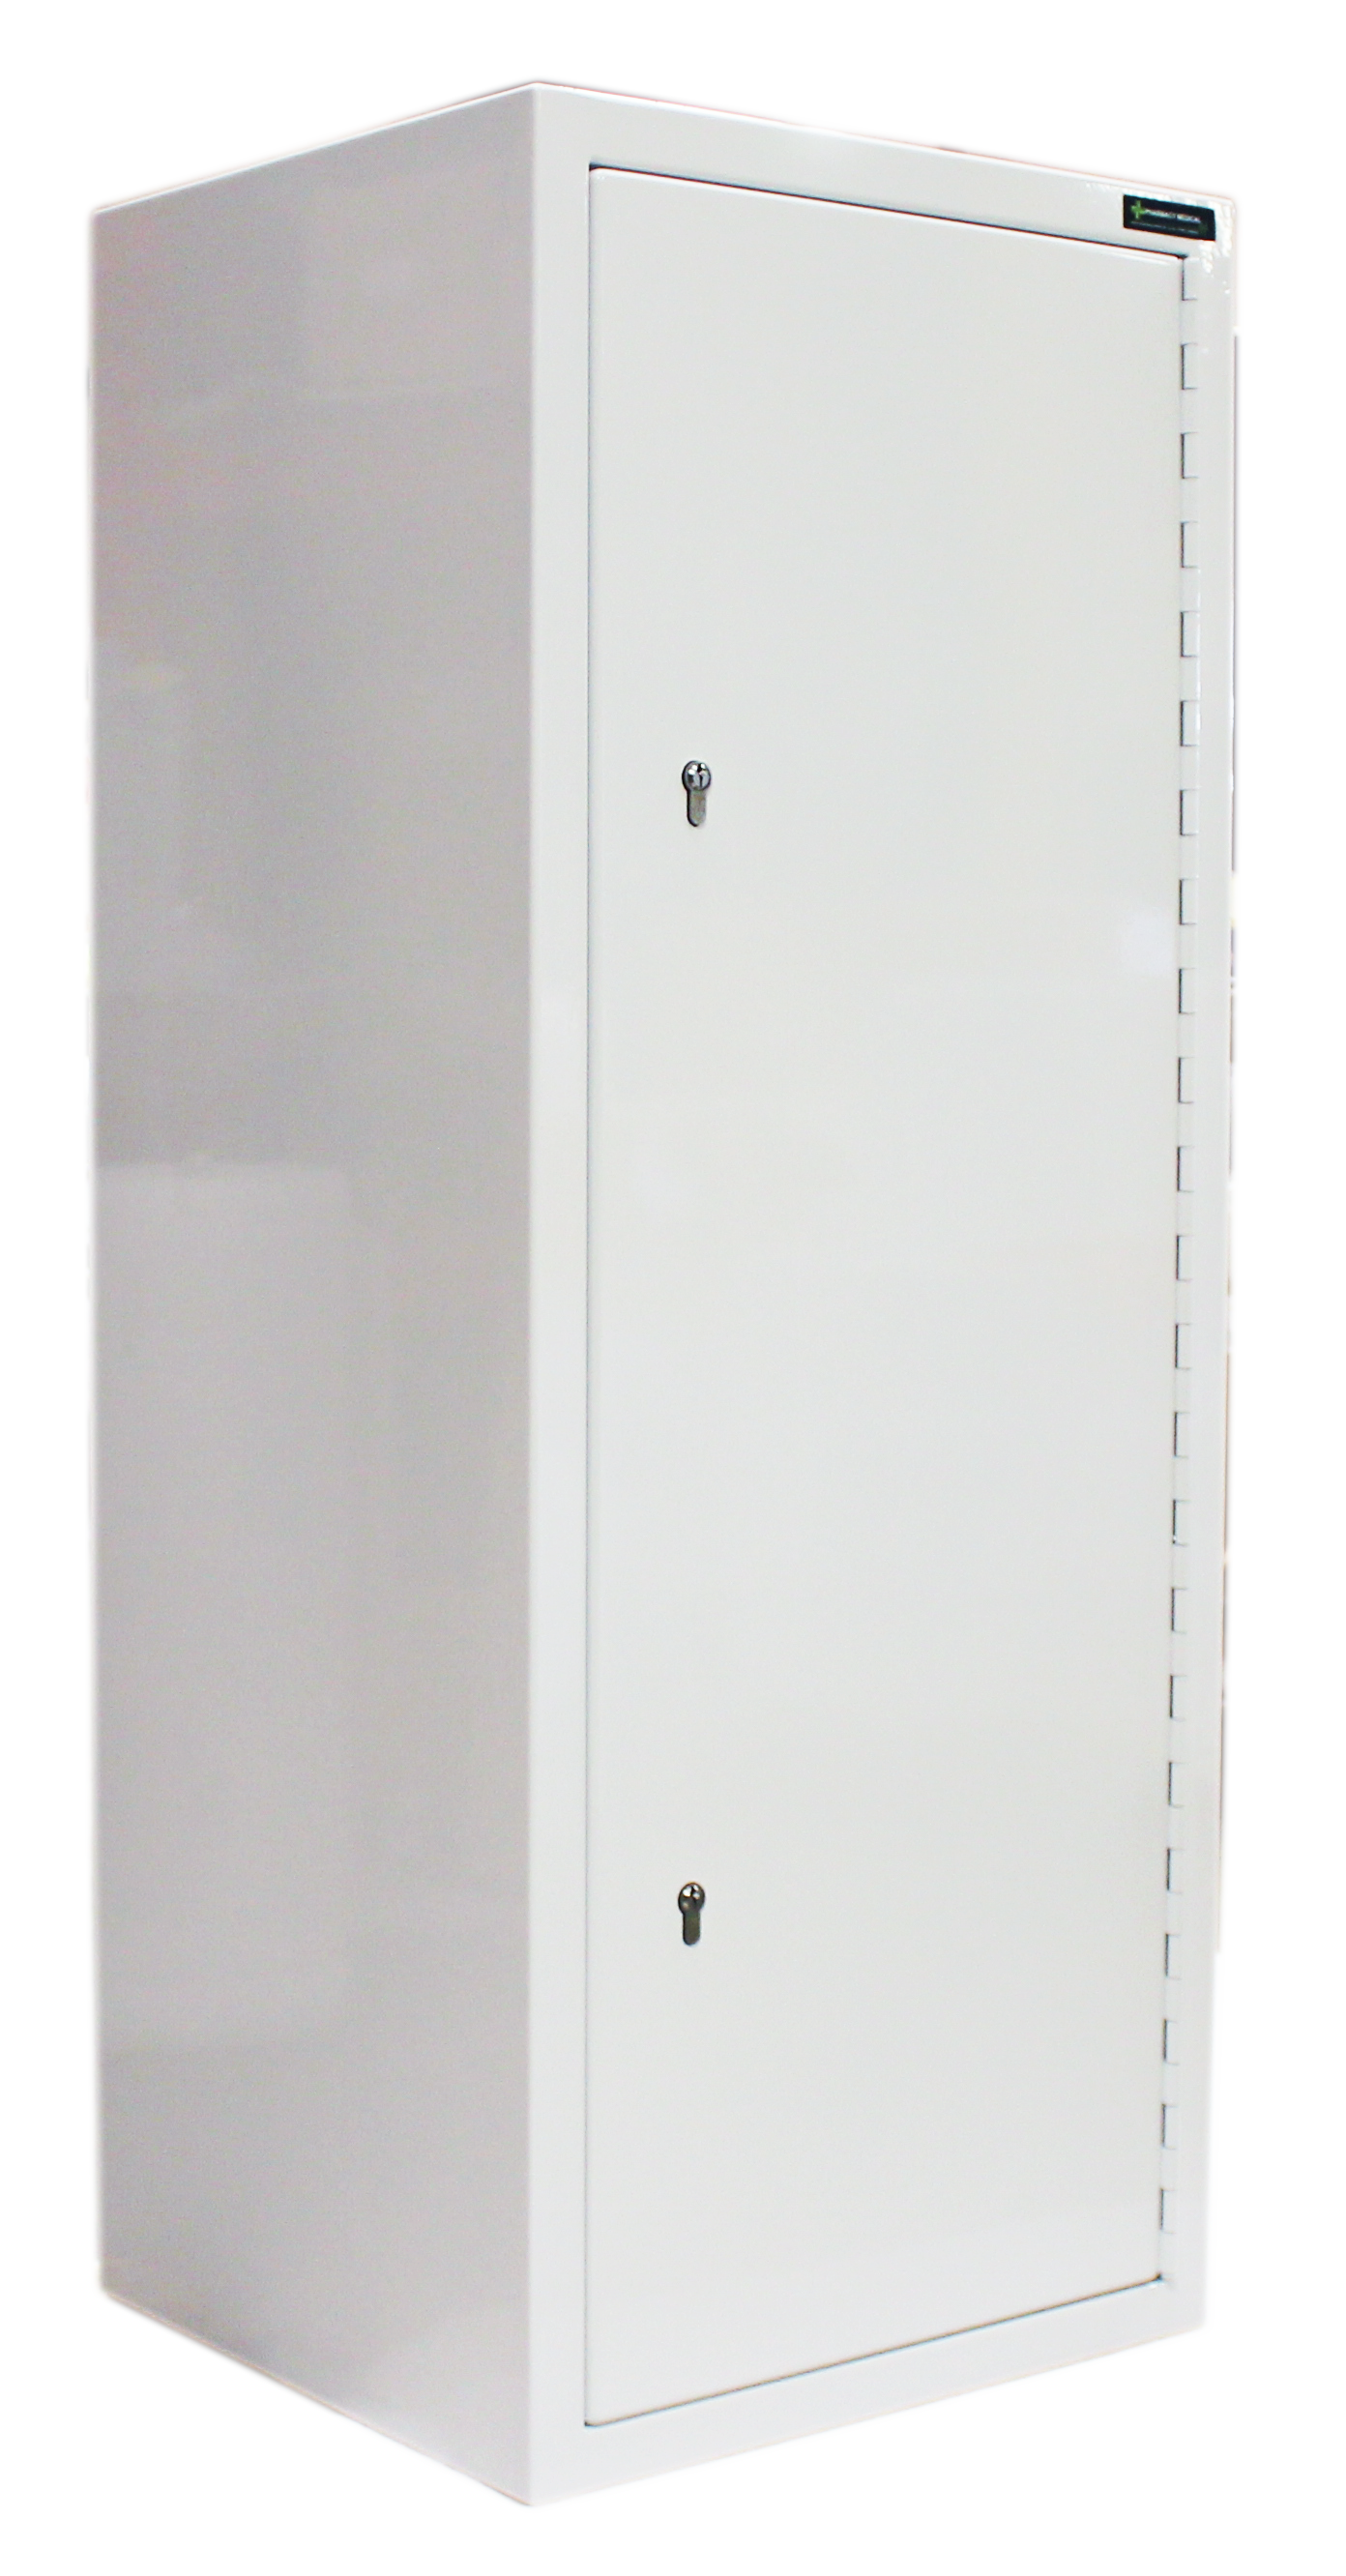 Pharmacy Medical - HECDC1050 CONTROLLED DRUGS CABINET 1250 X 500 X 450mm | 3 SHELVES (Adjustable) |  R or L HINGE, optional warning light